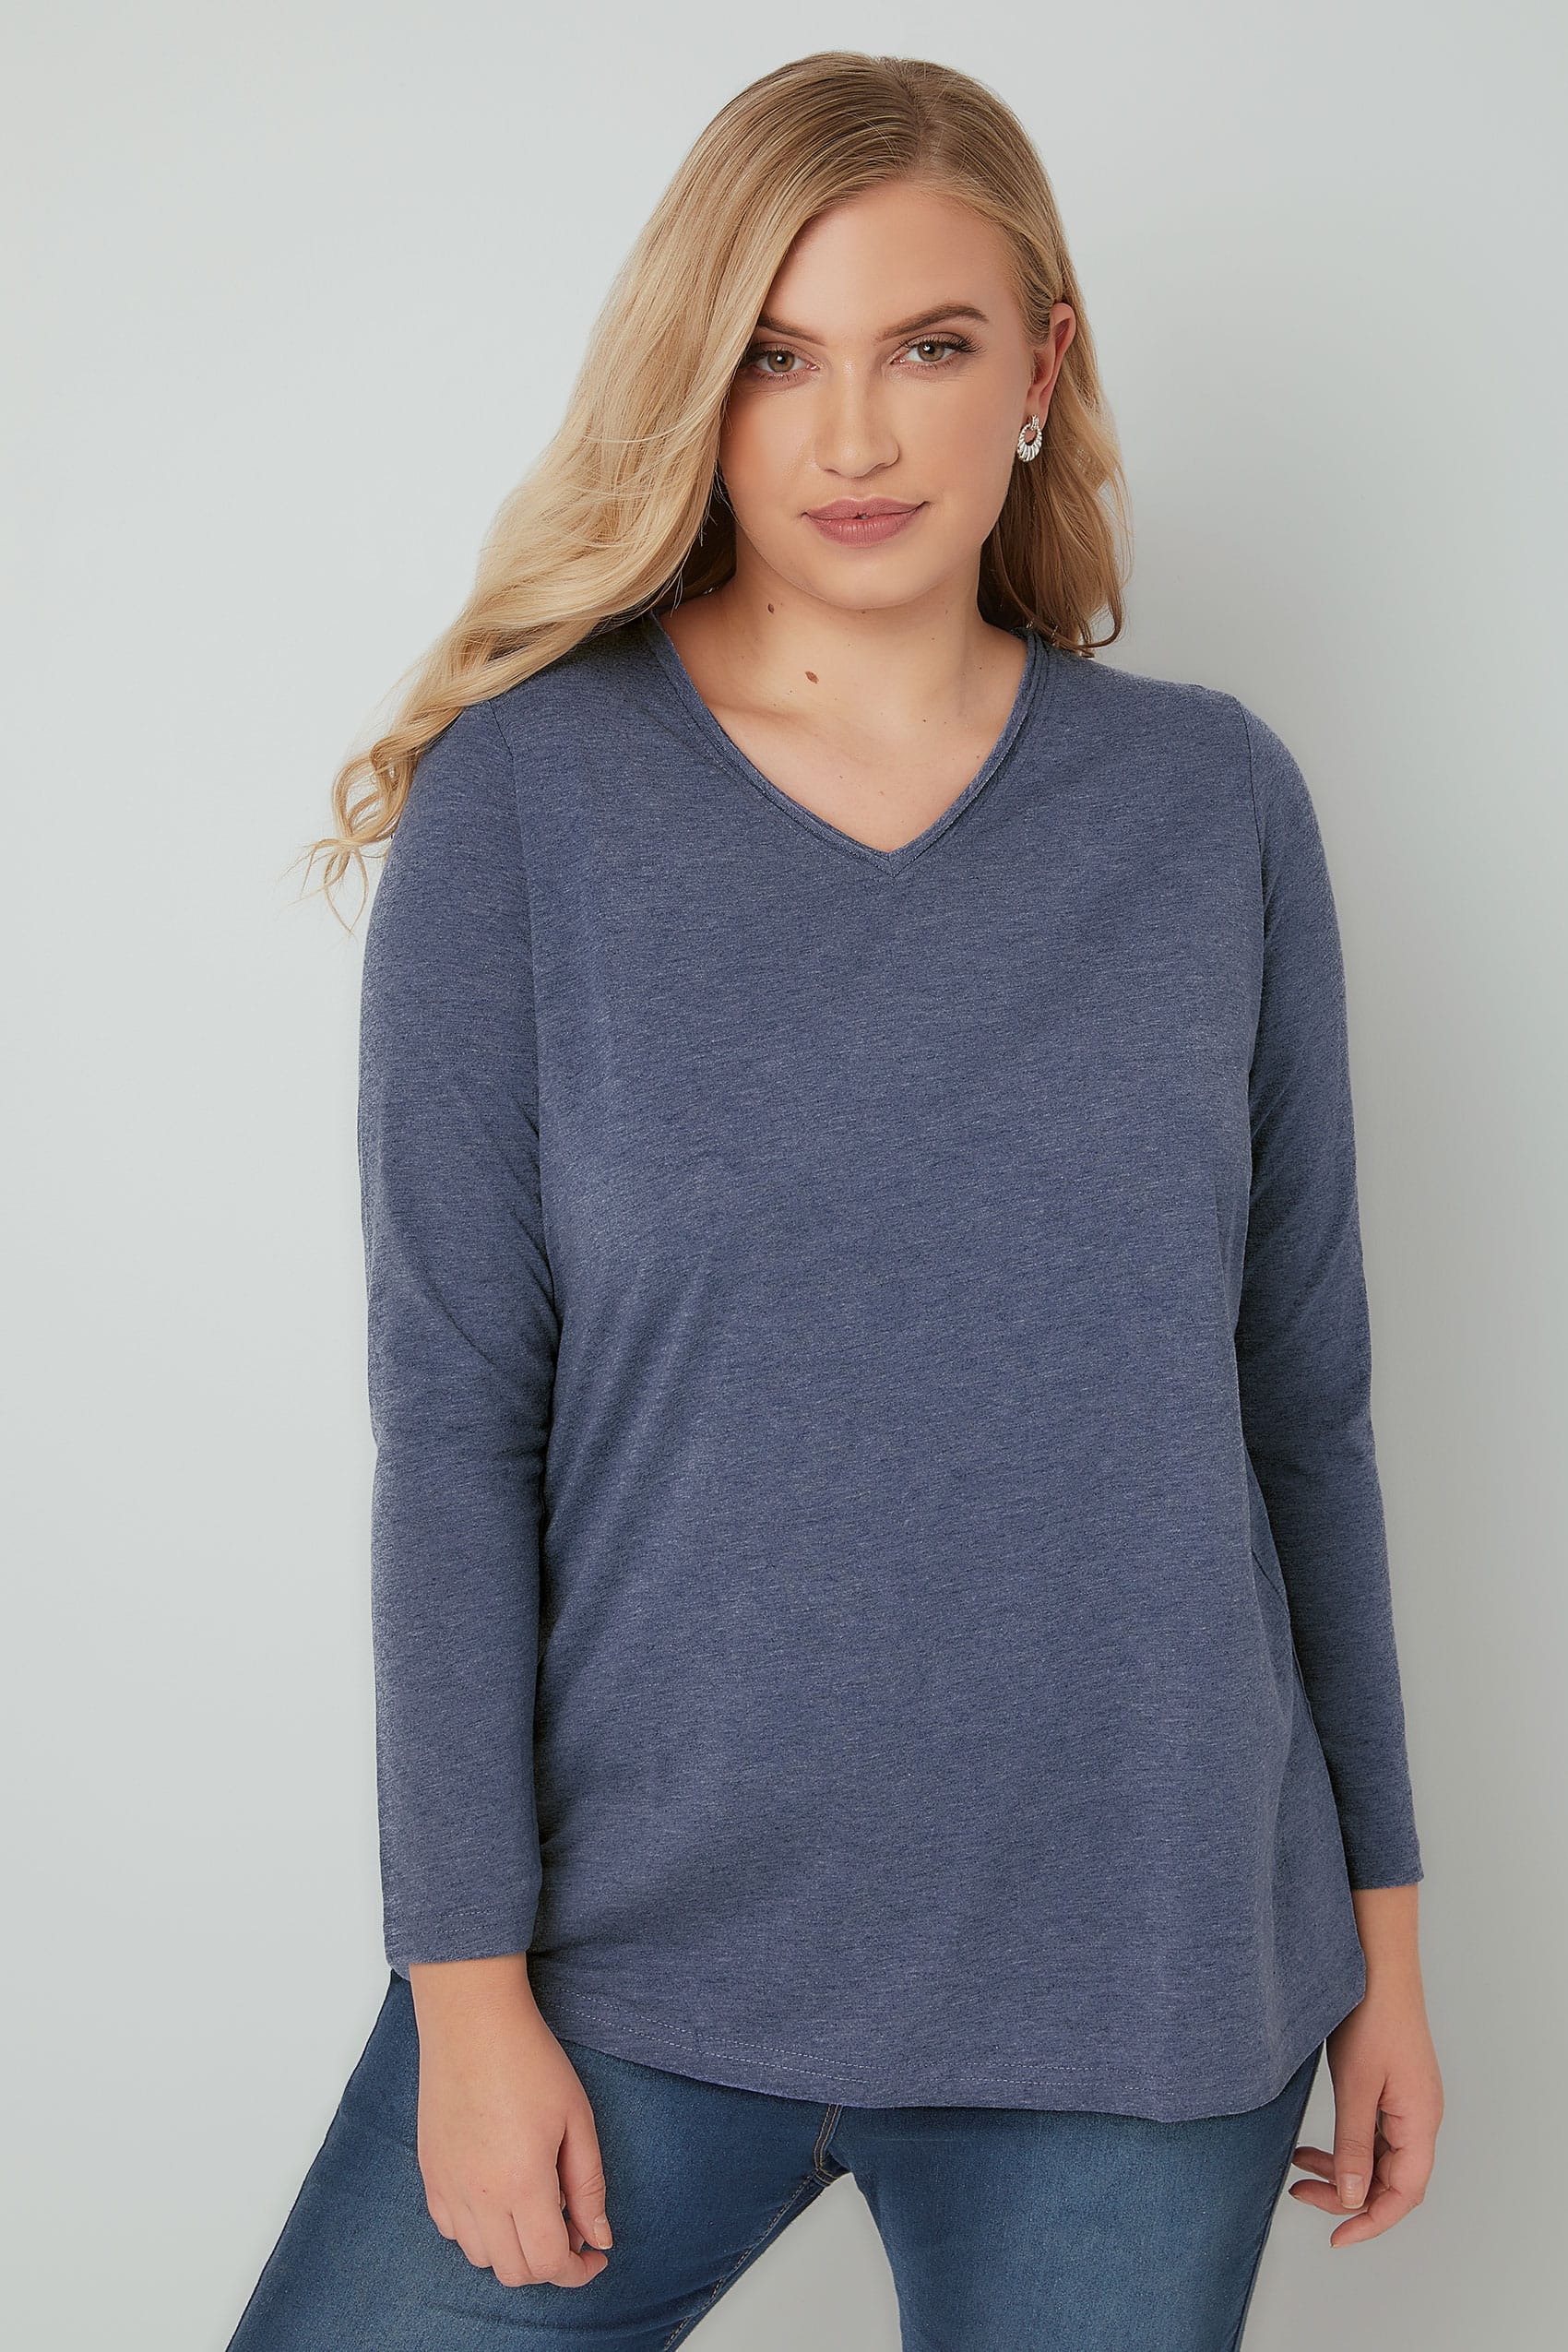 Navy Long Sleeved V-Neck Jersey Top, Plus size 16 to 36